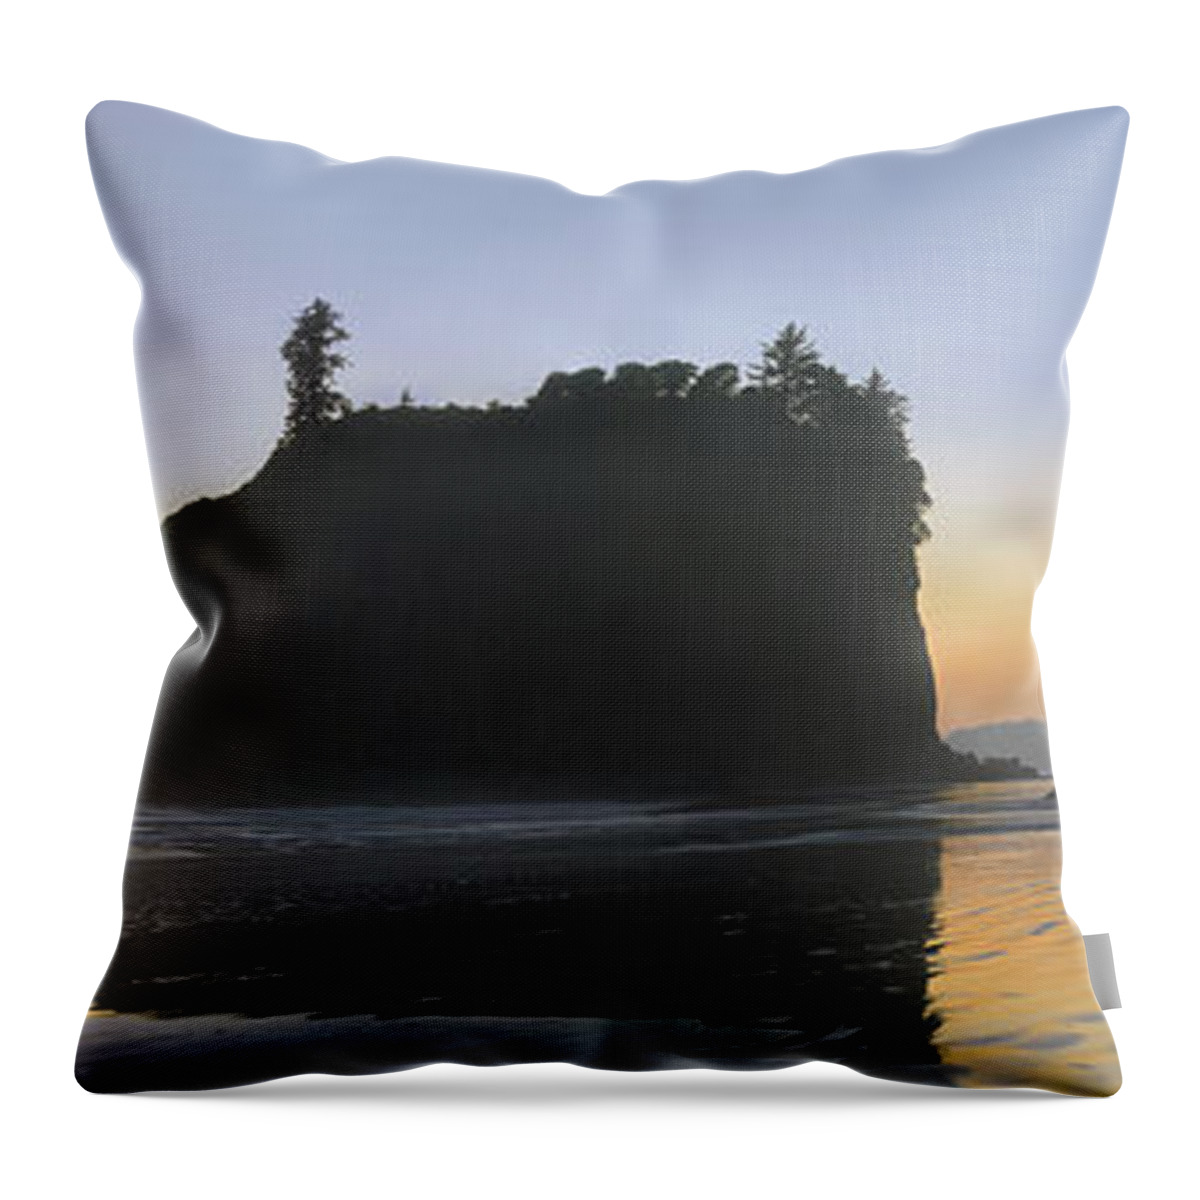 Feb0514 Throw Pillow featuring the photograph Abby Island And Seastacks At Sunset by Tim Fitzharris